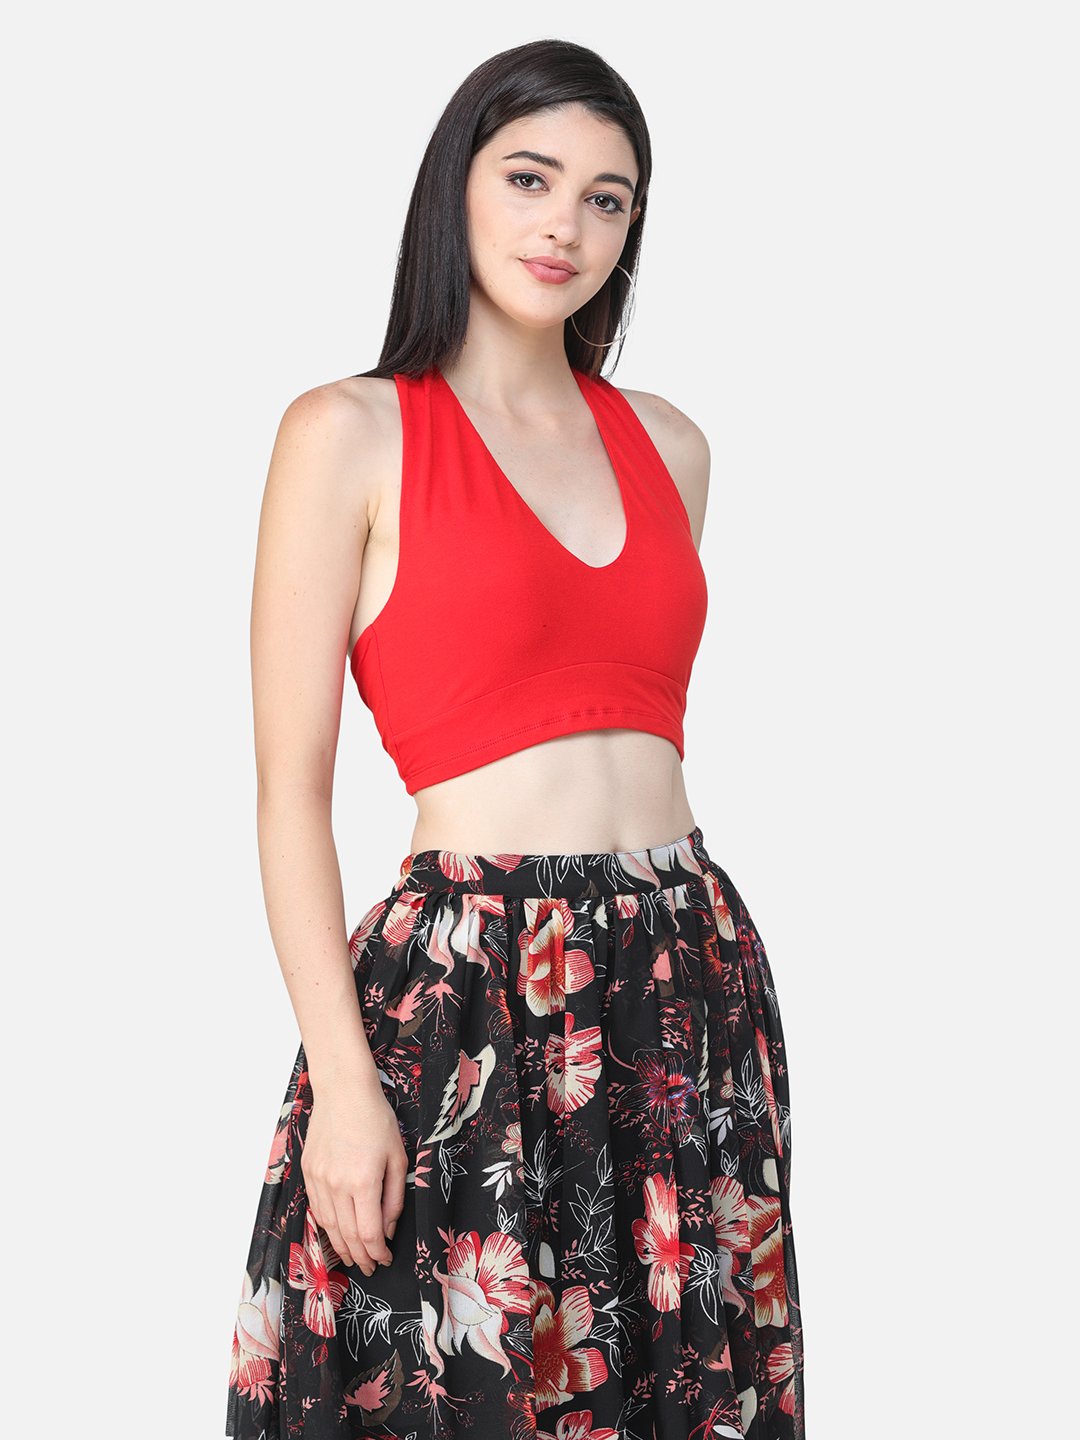 SCORPIUS SOLID RED CROP TOP